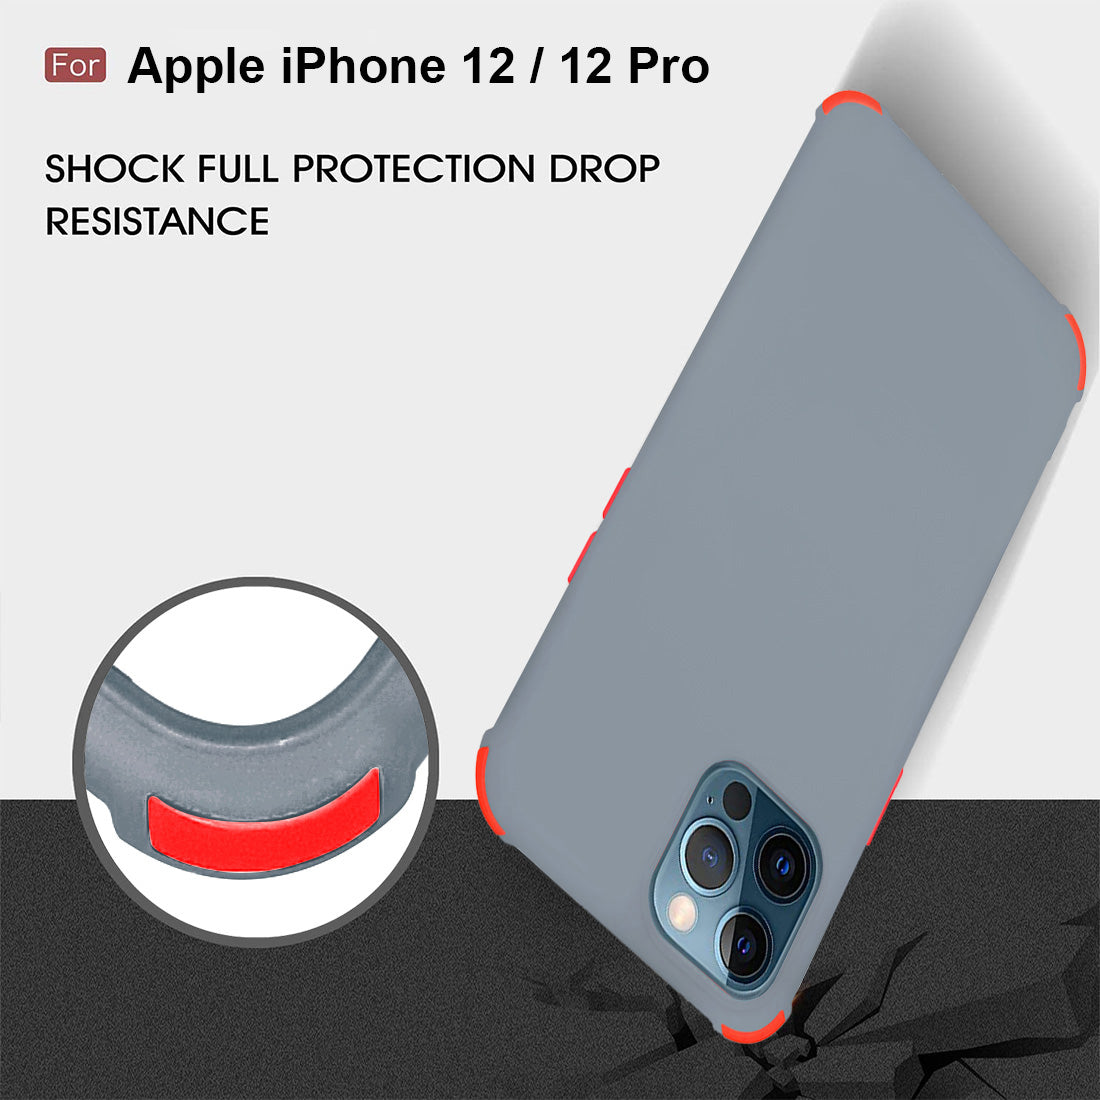 Matte Finish TPU Back Cover for Apple iPhone 12 / 12 Pro